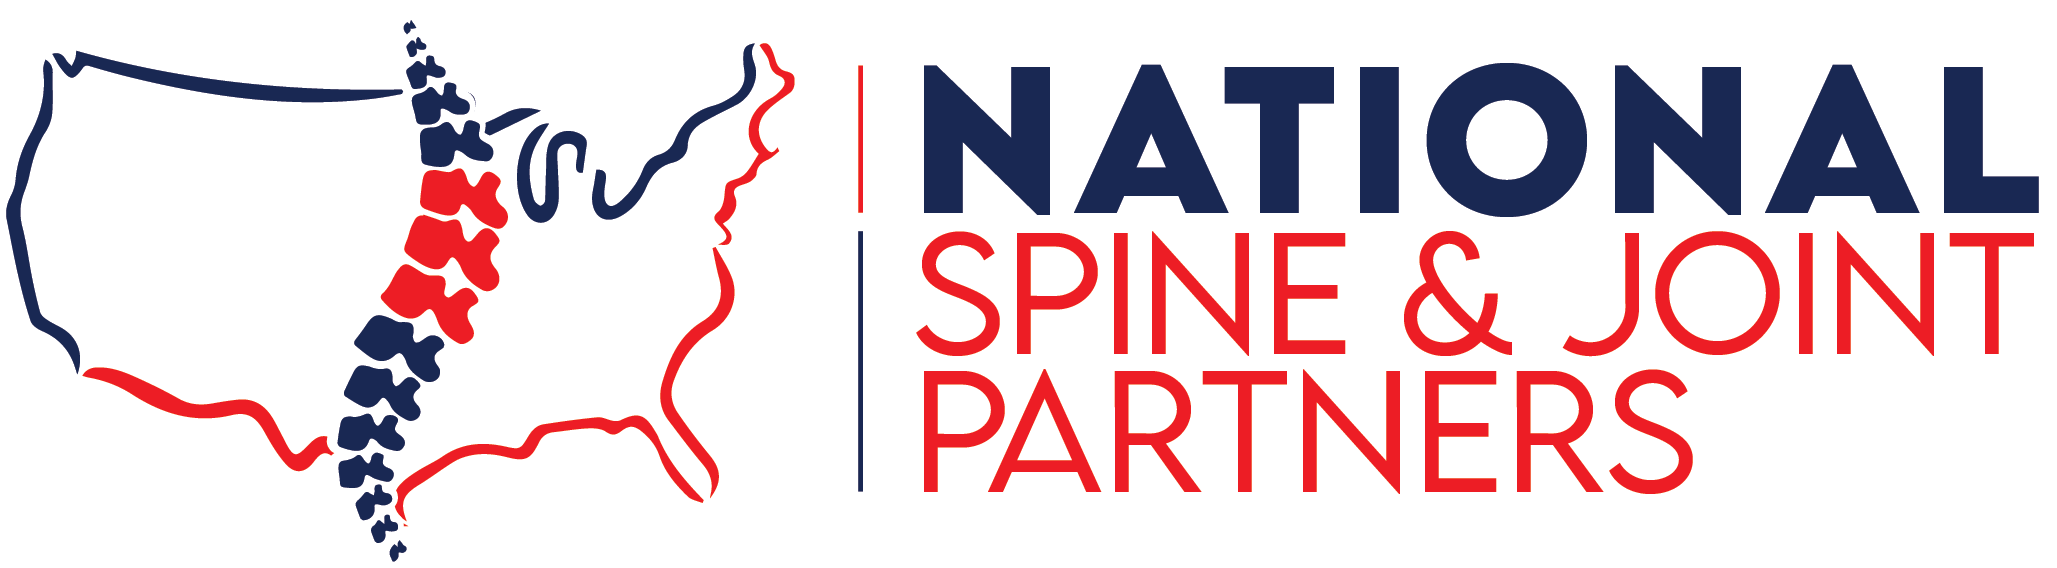 National Spine & Joint Partners